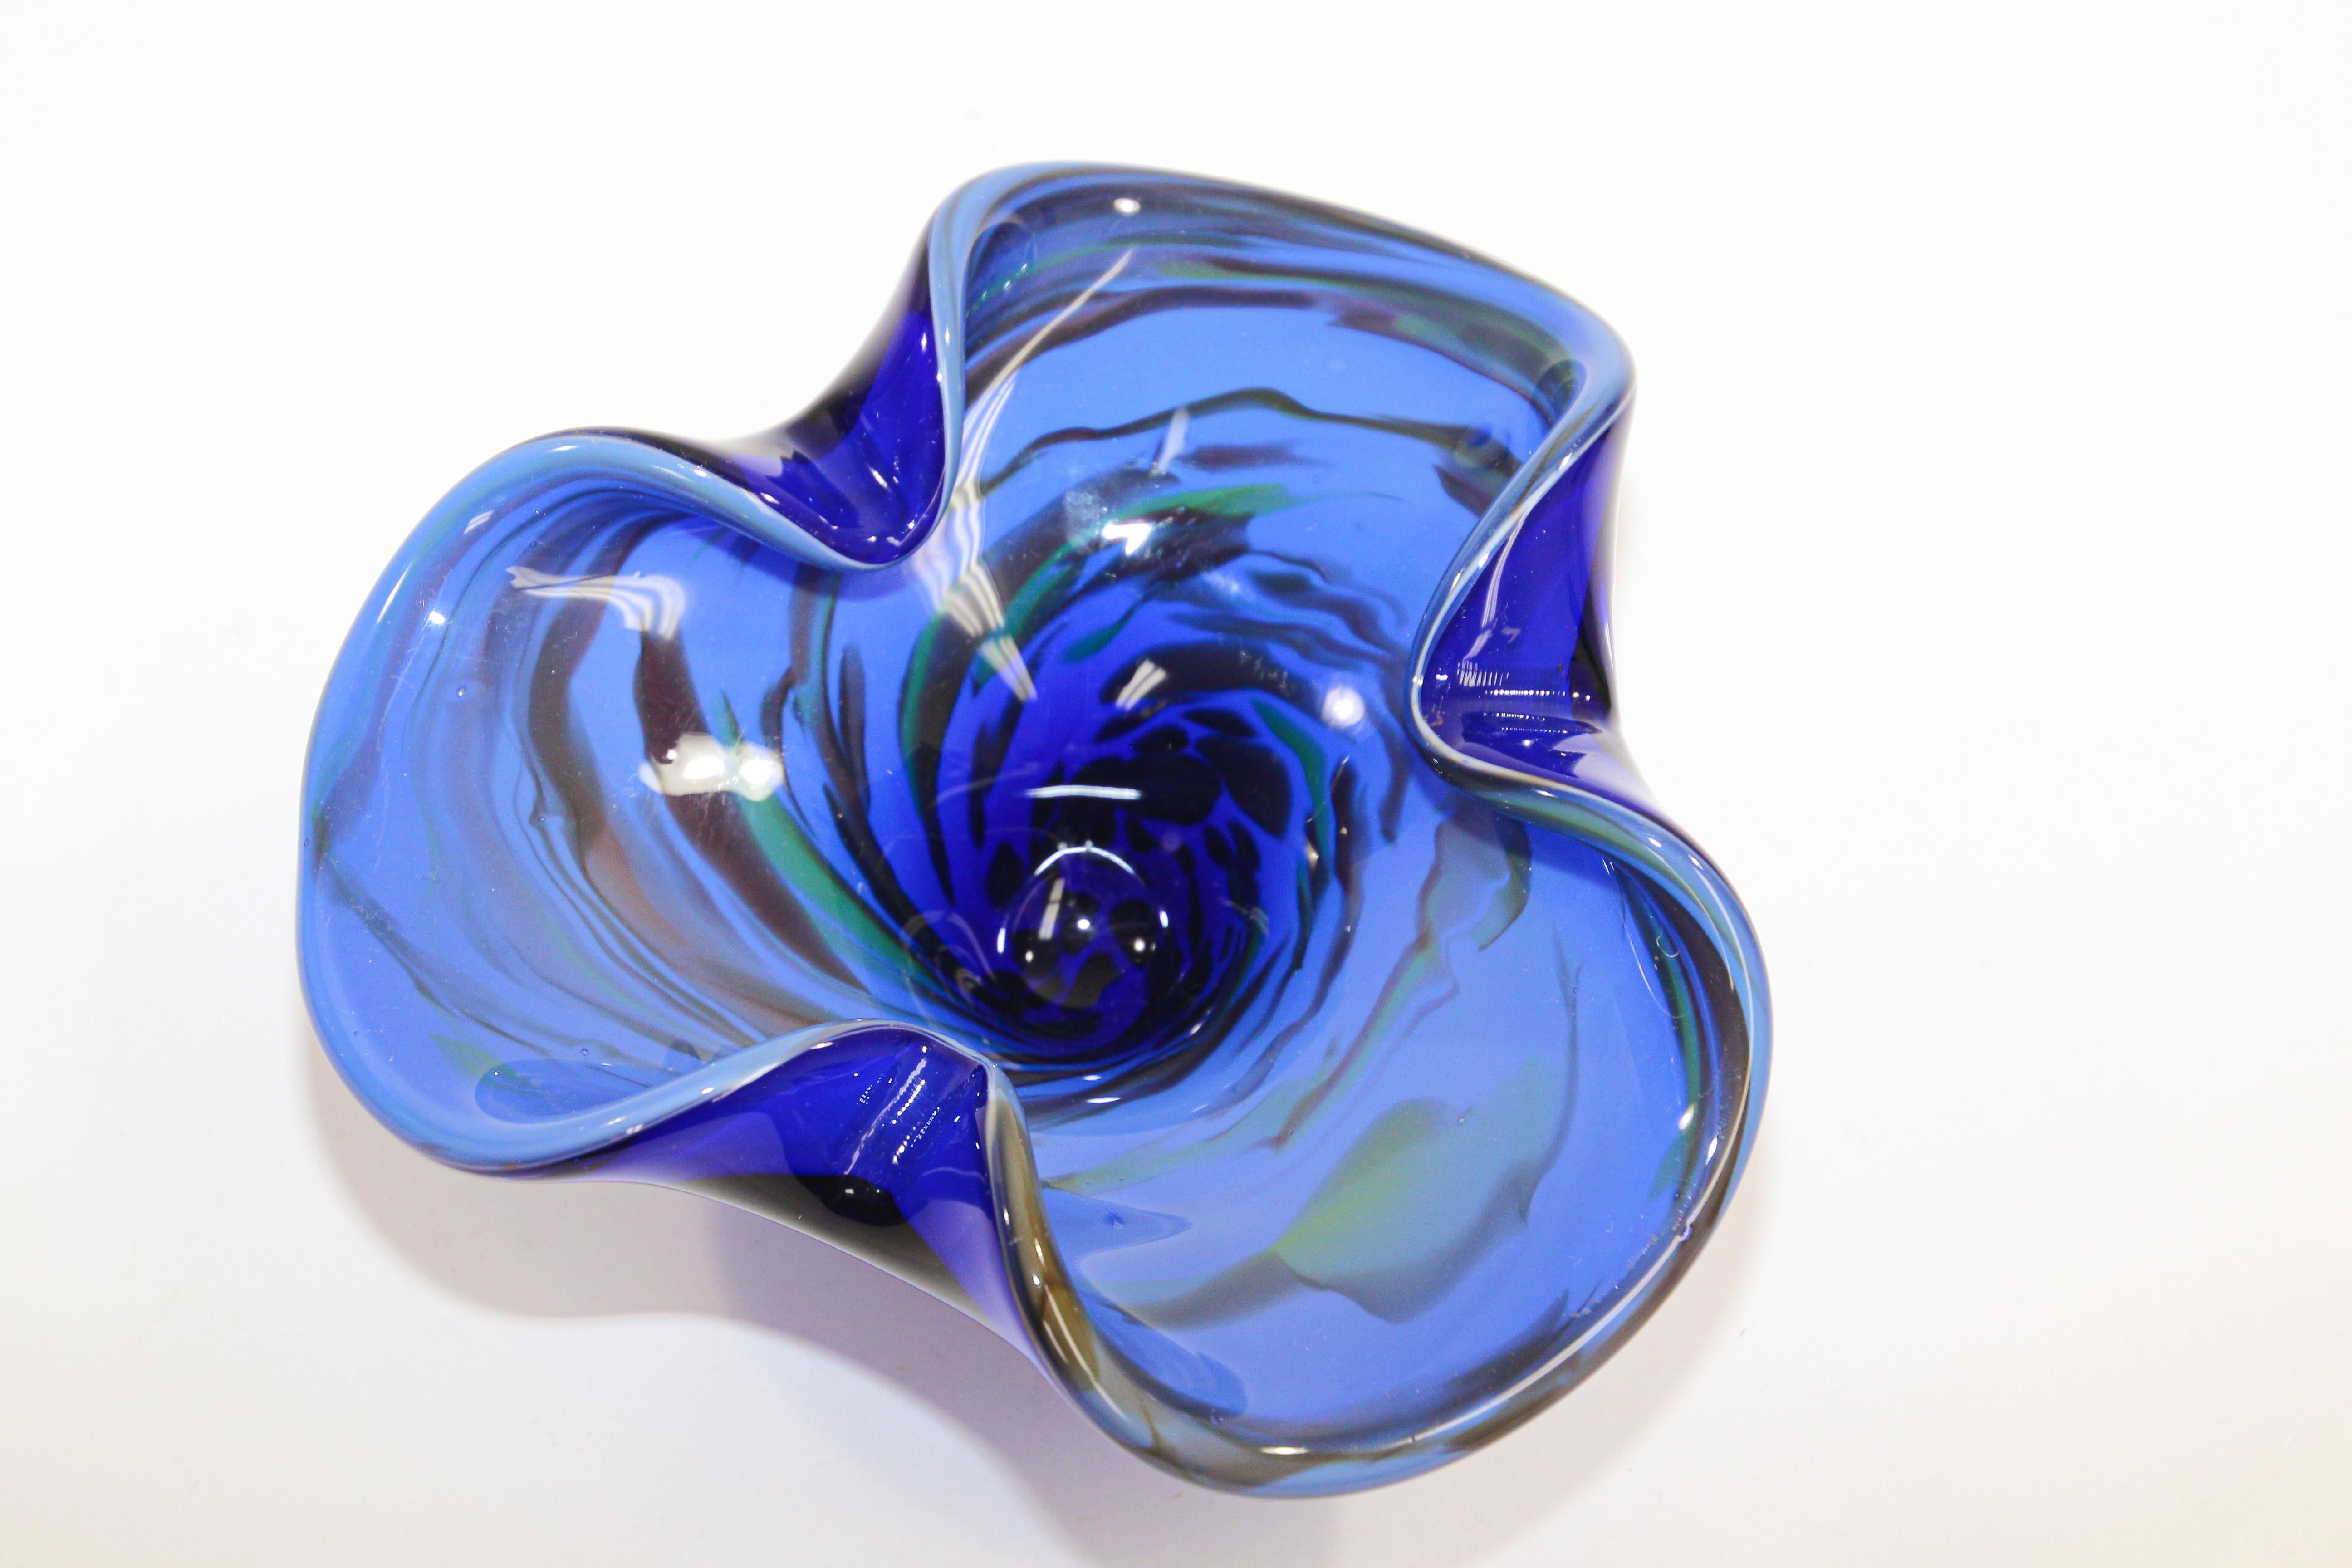 Gorgeous Vintage Murano Venetian handblown art glass flower shaped bowl or ashtray. 
Sculptural organic open flower form in cobalt blue art glass ashtray bowl.
Use it as an ashtray, vide poche or for decorative bowl or paper weight.
no